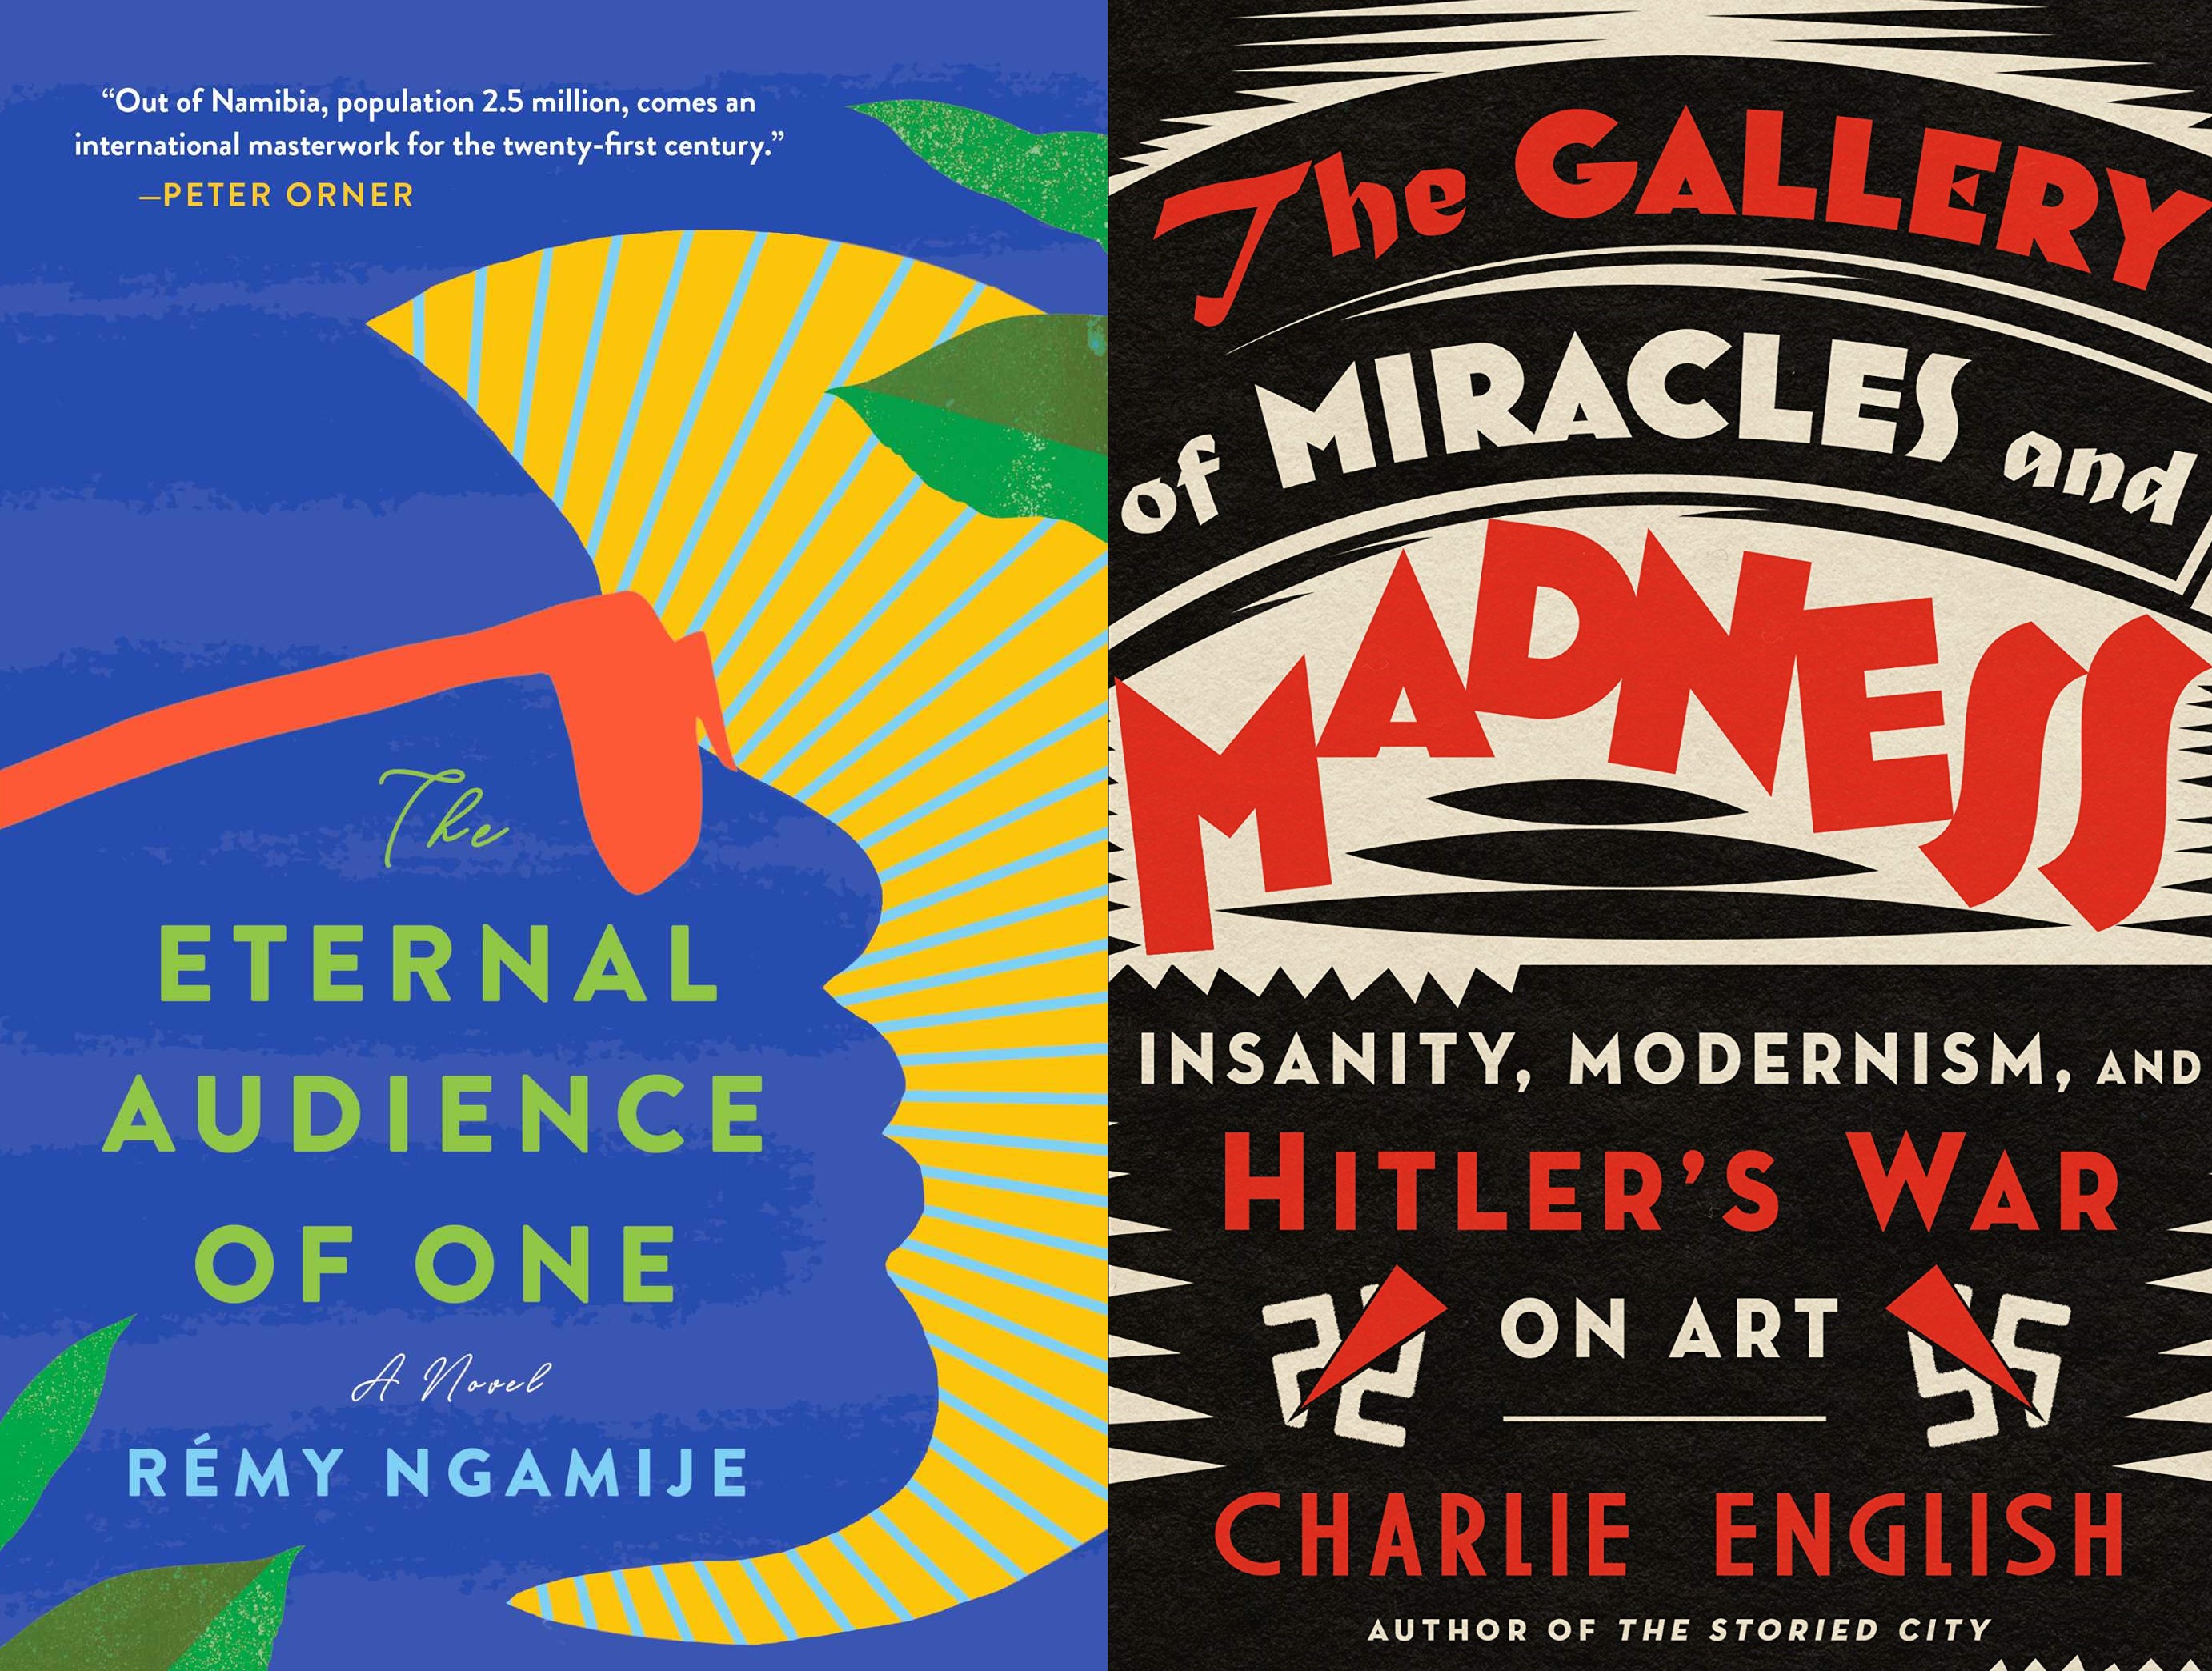 Colson Whitehead’s ‘Harlem Shuffle,’ Rémy Ngamije’s The Eternal Audience of One,’ and 60 Other Exceptional Titles| Starred Reviews, August 2021